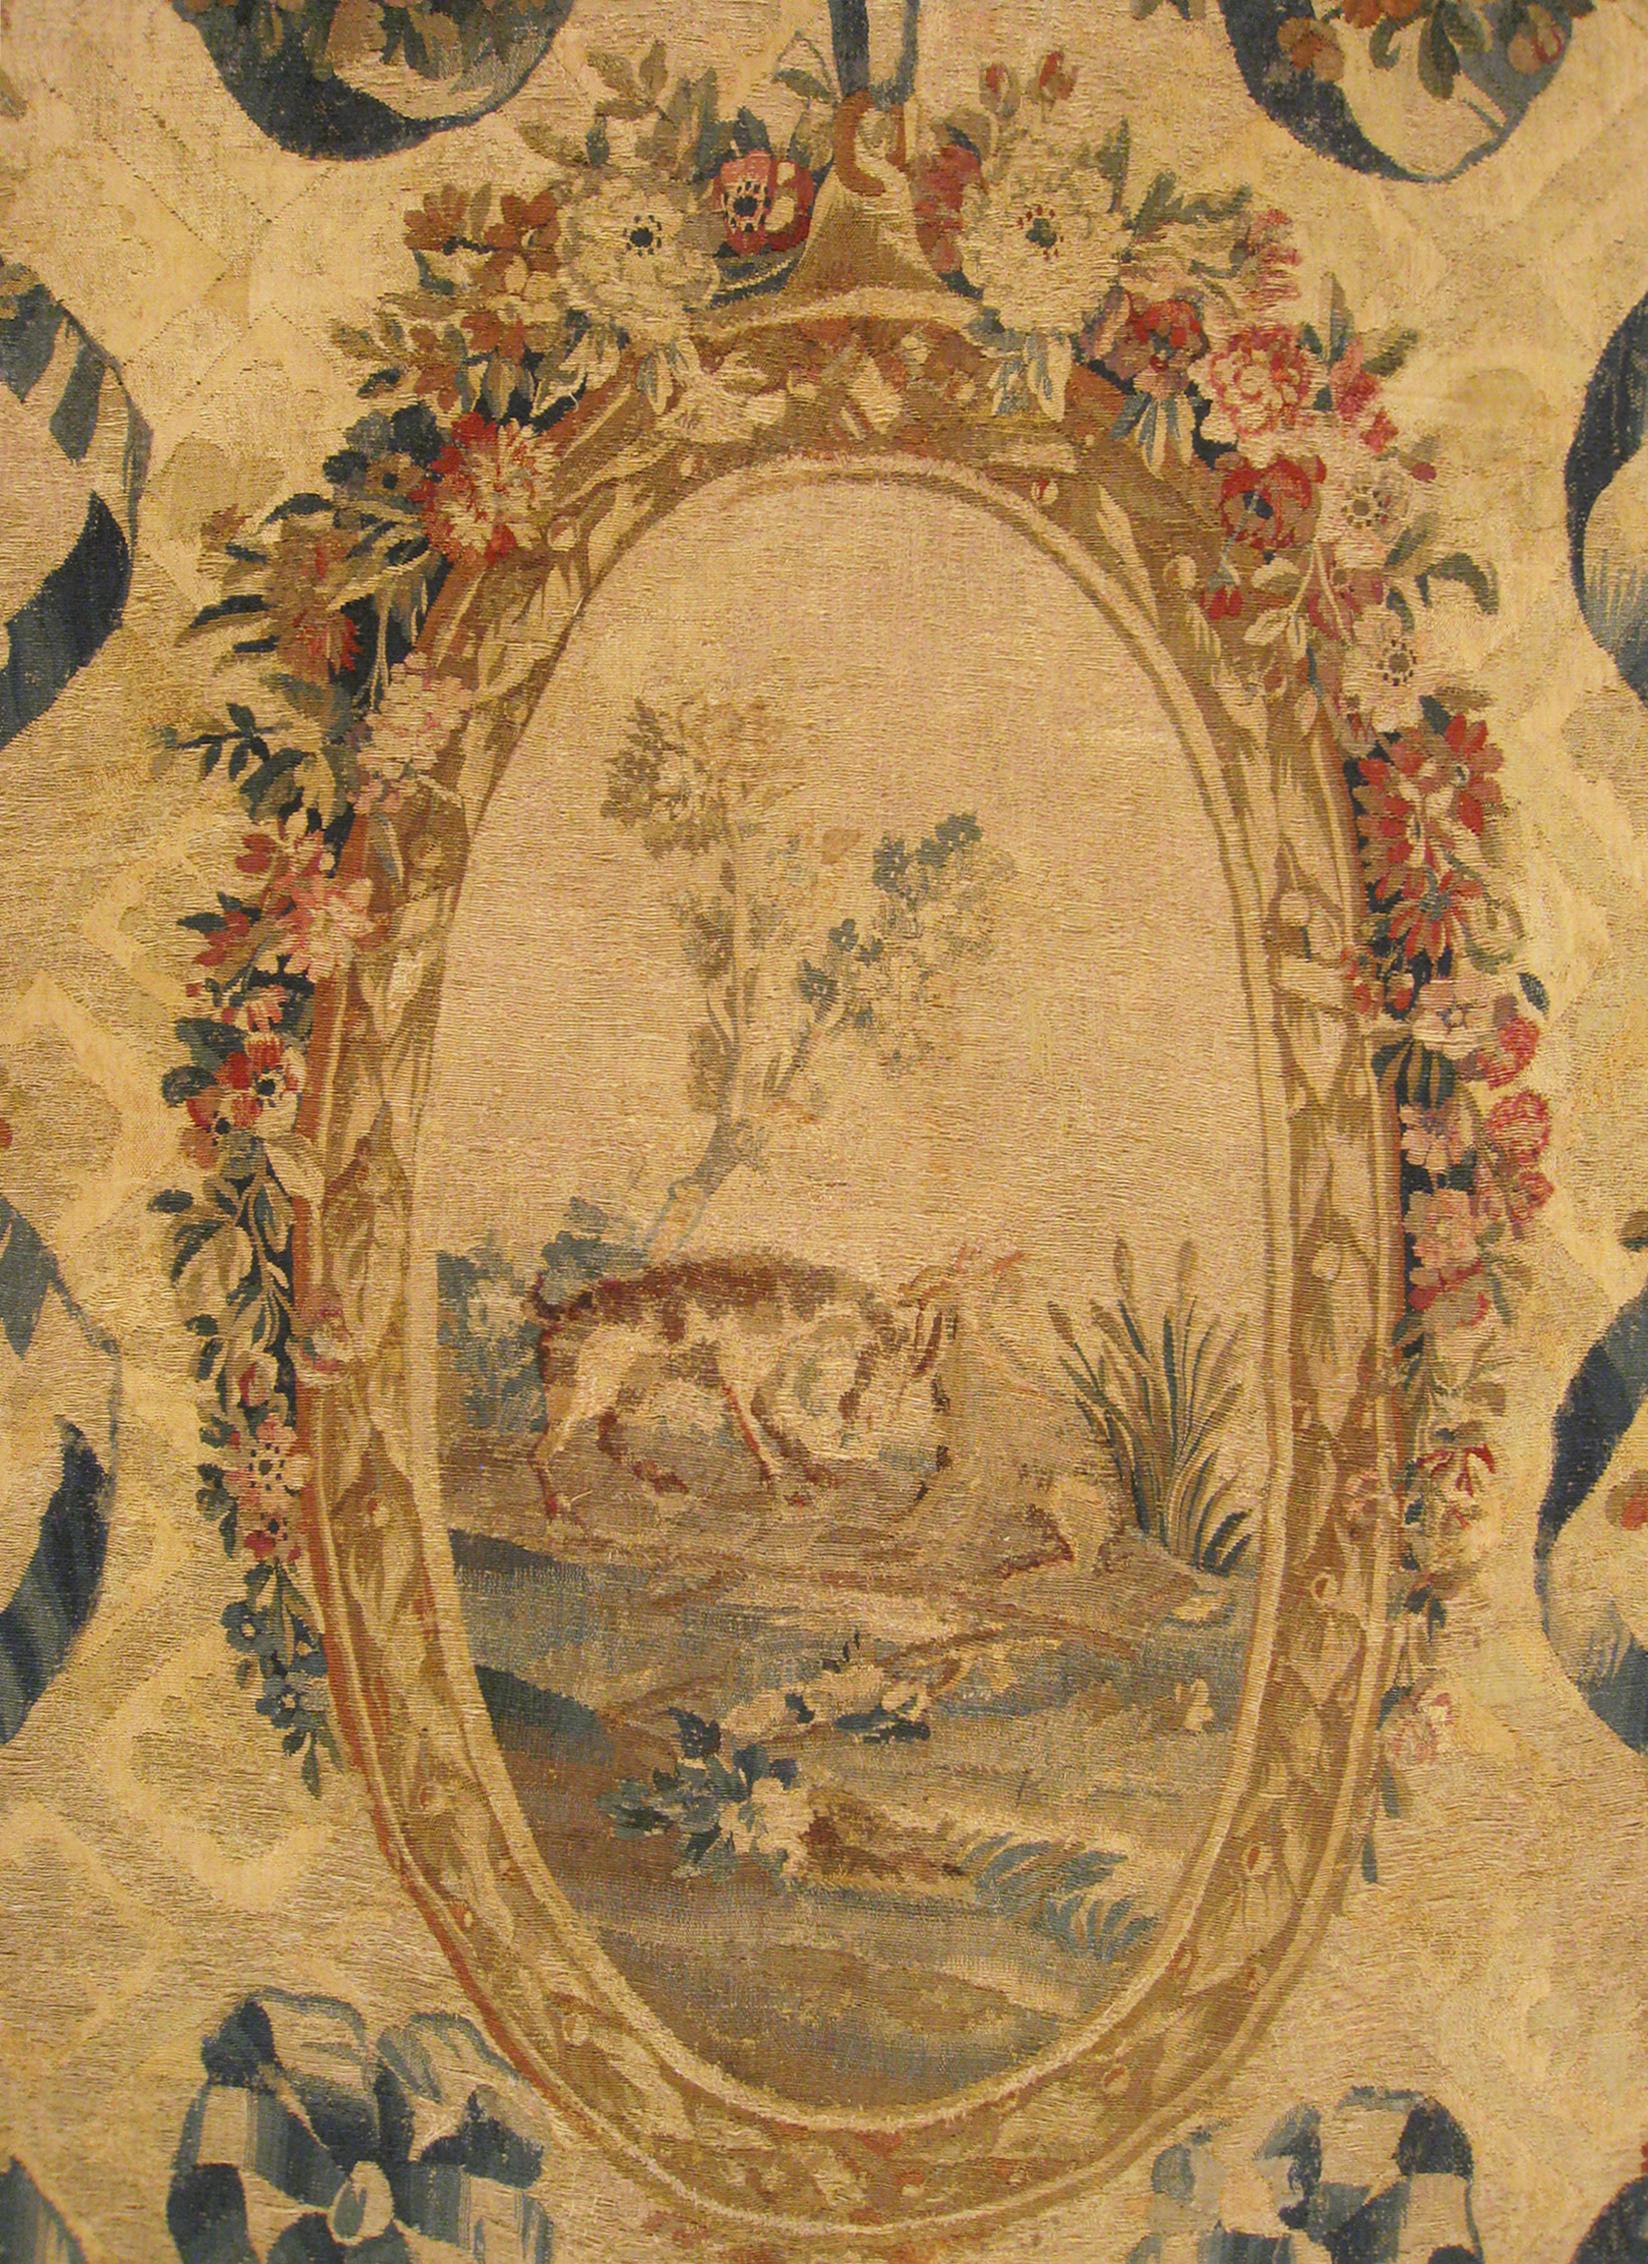 Hand-Woven 19th Century French Aubusson Needlepoint Tapestry, Ribbon Weave and Pendant For Sale